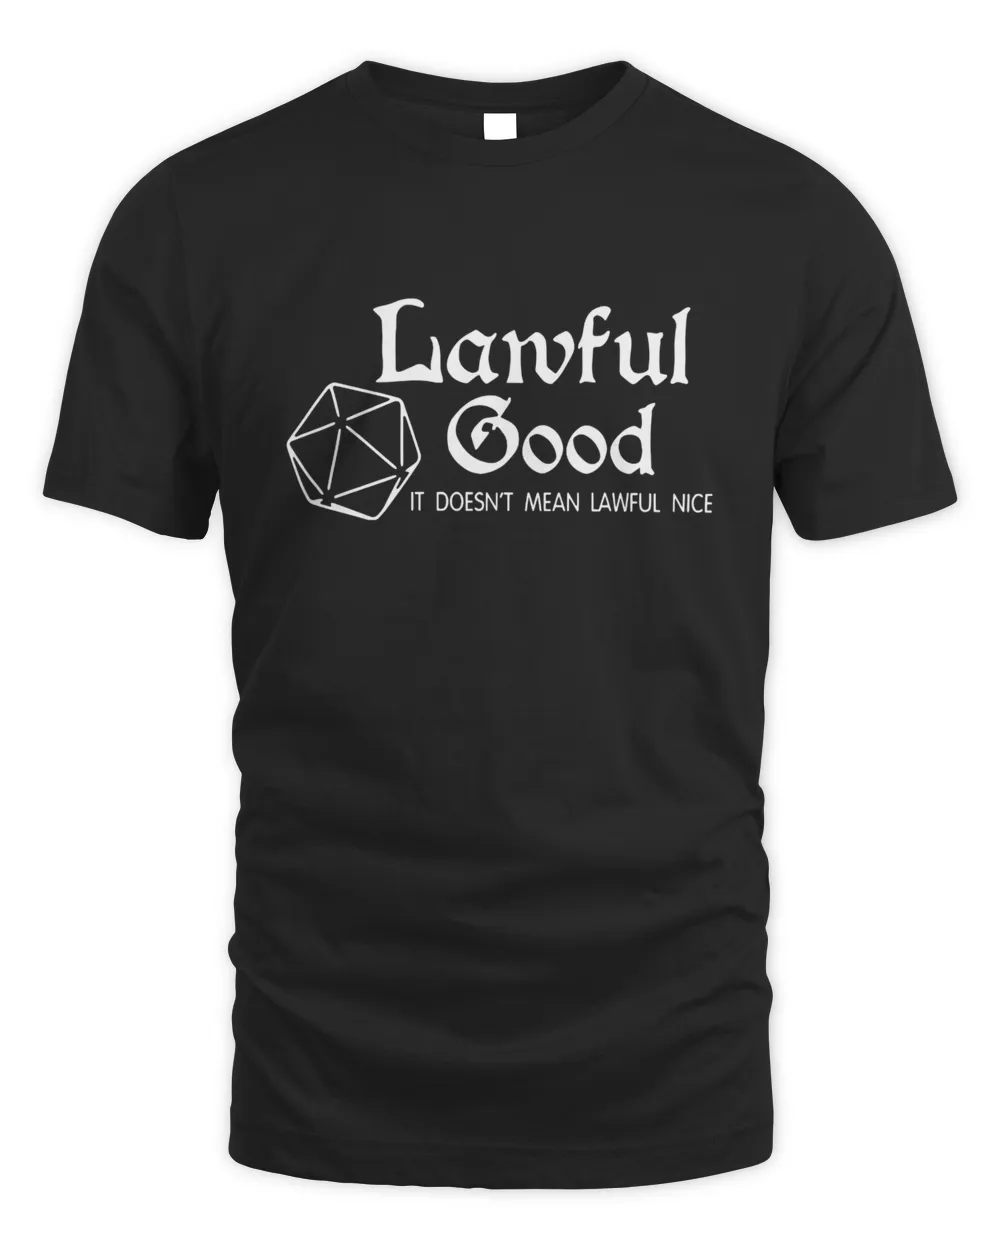 Lawful Good Doesn’t Mean Lawful Nice Shirt